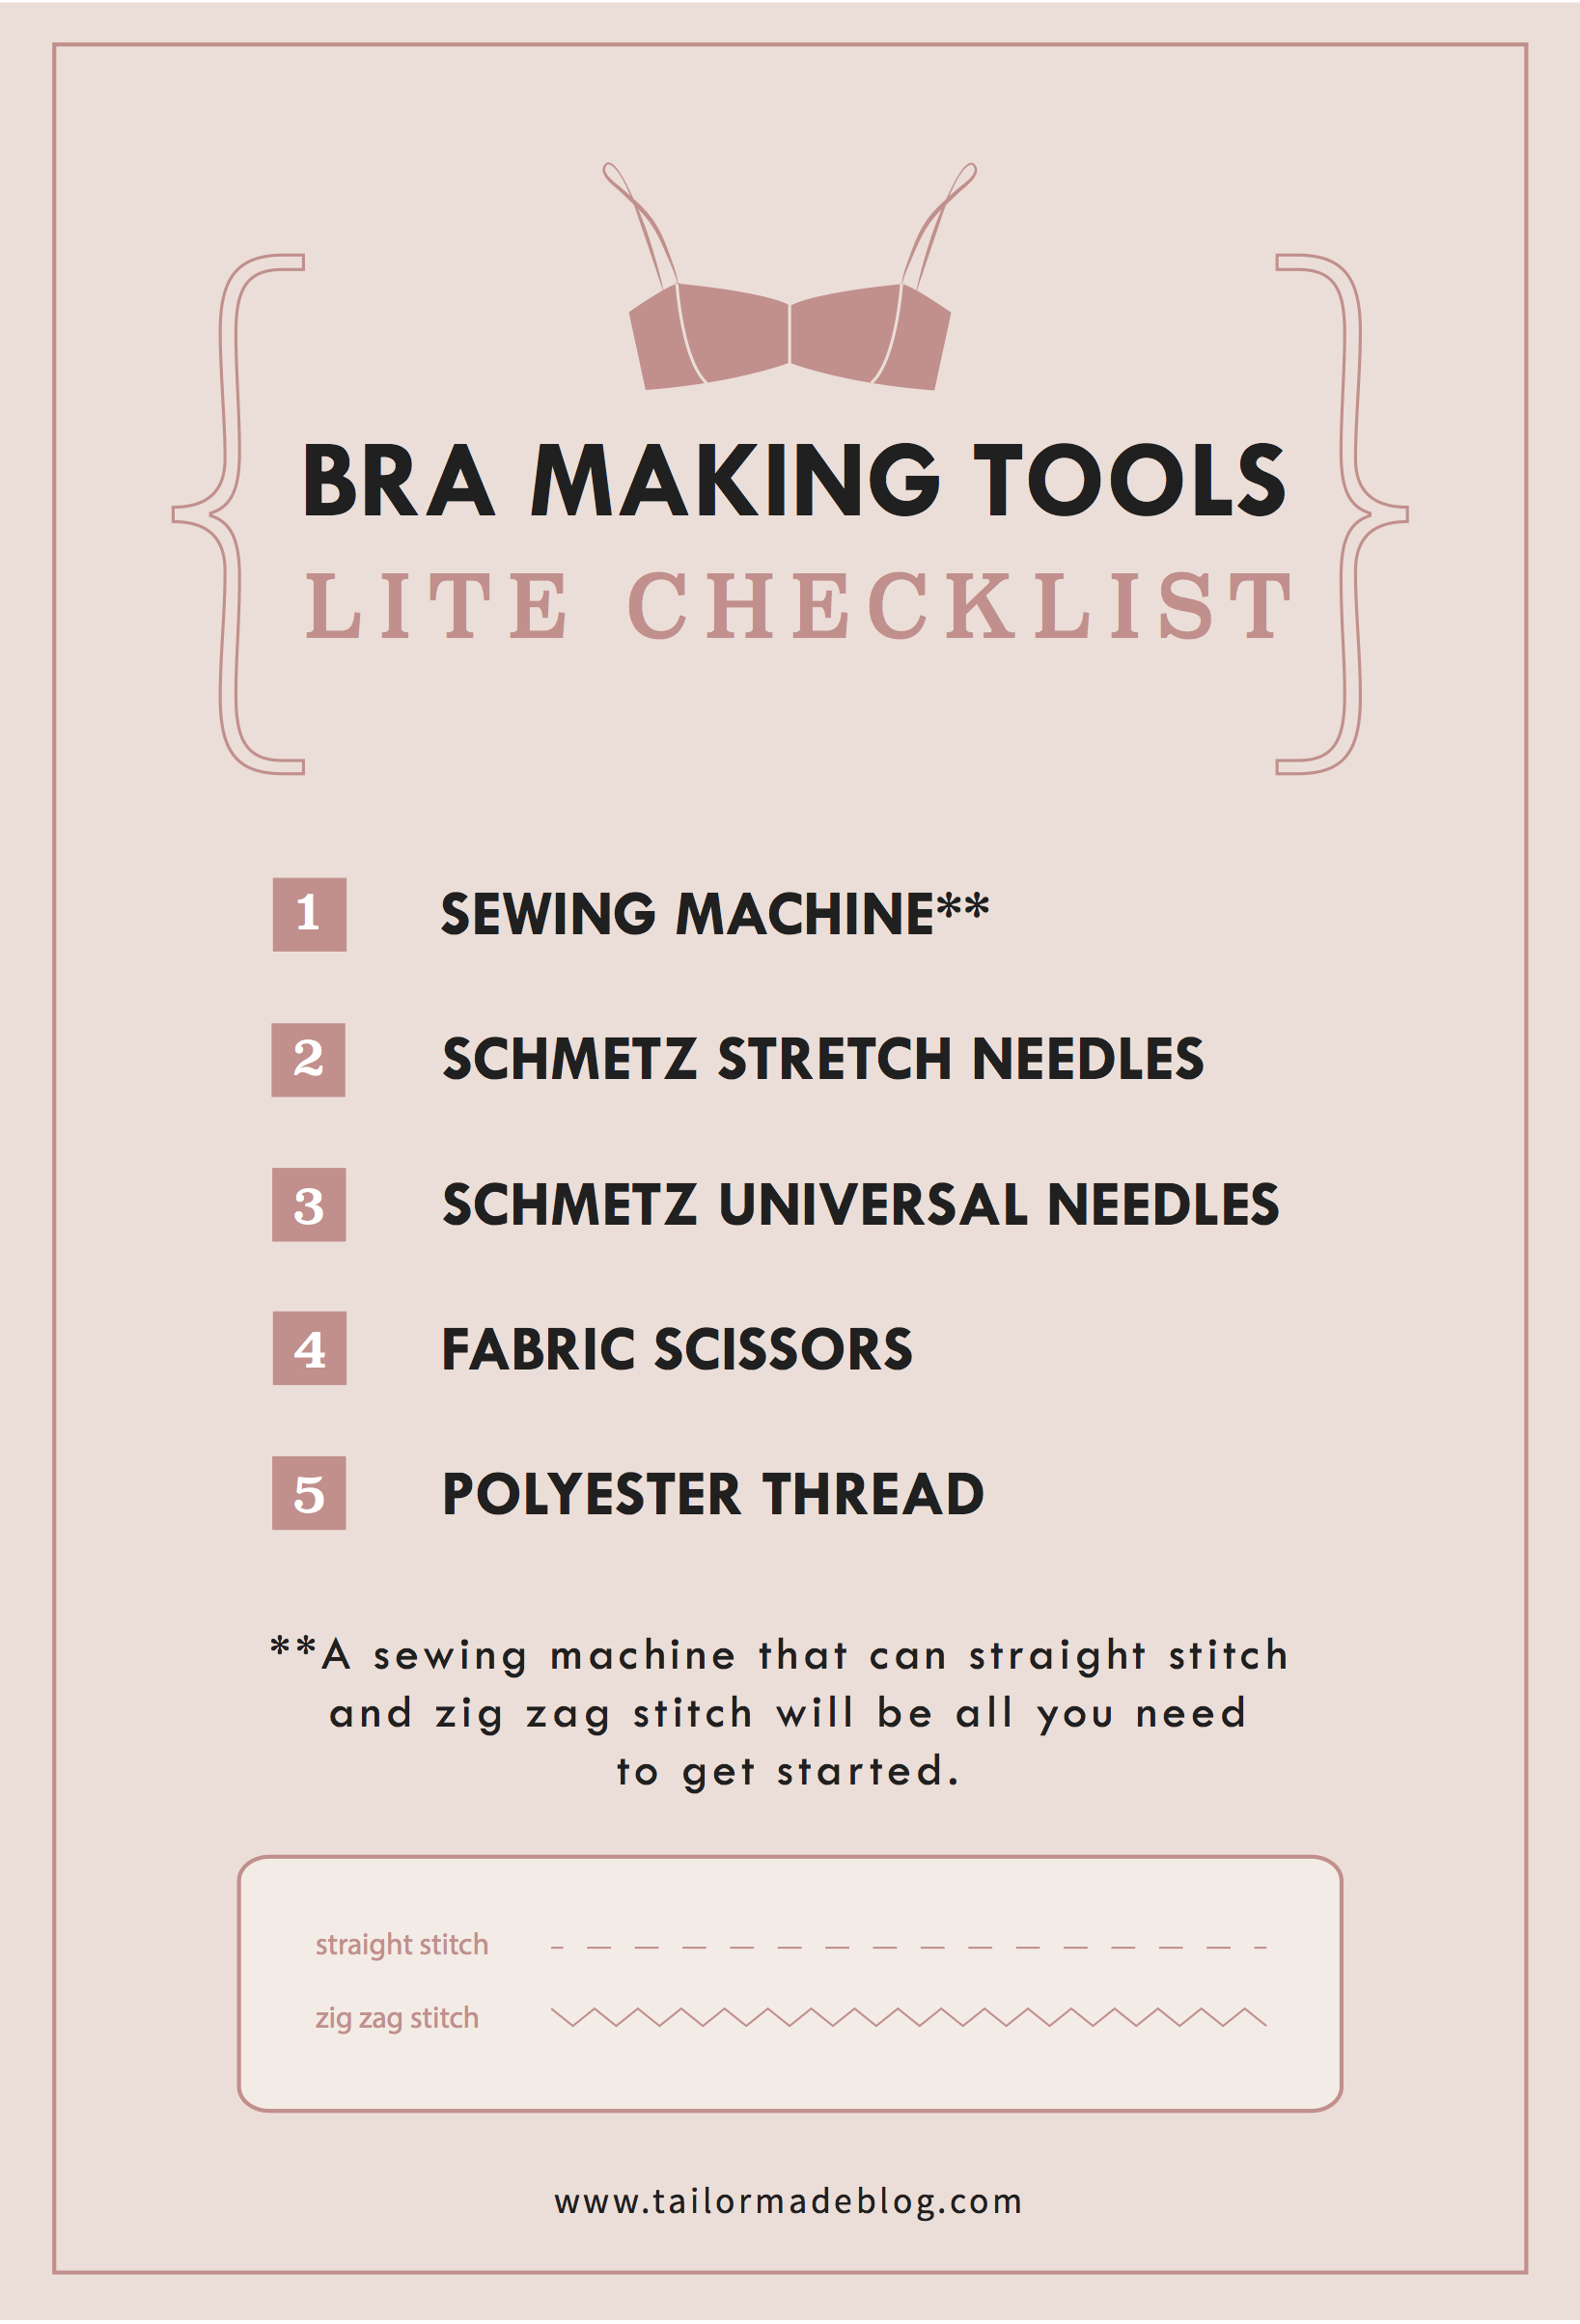 bra making tools checklist basic bra making tools what tools do I need to get started in bra making